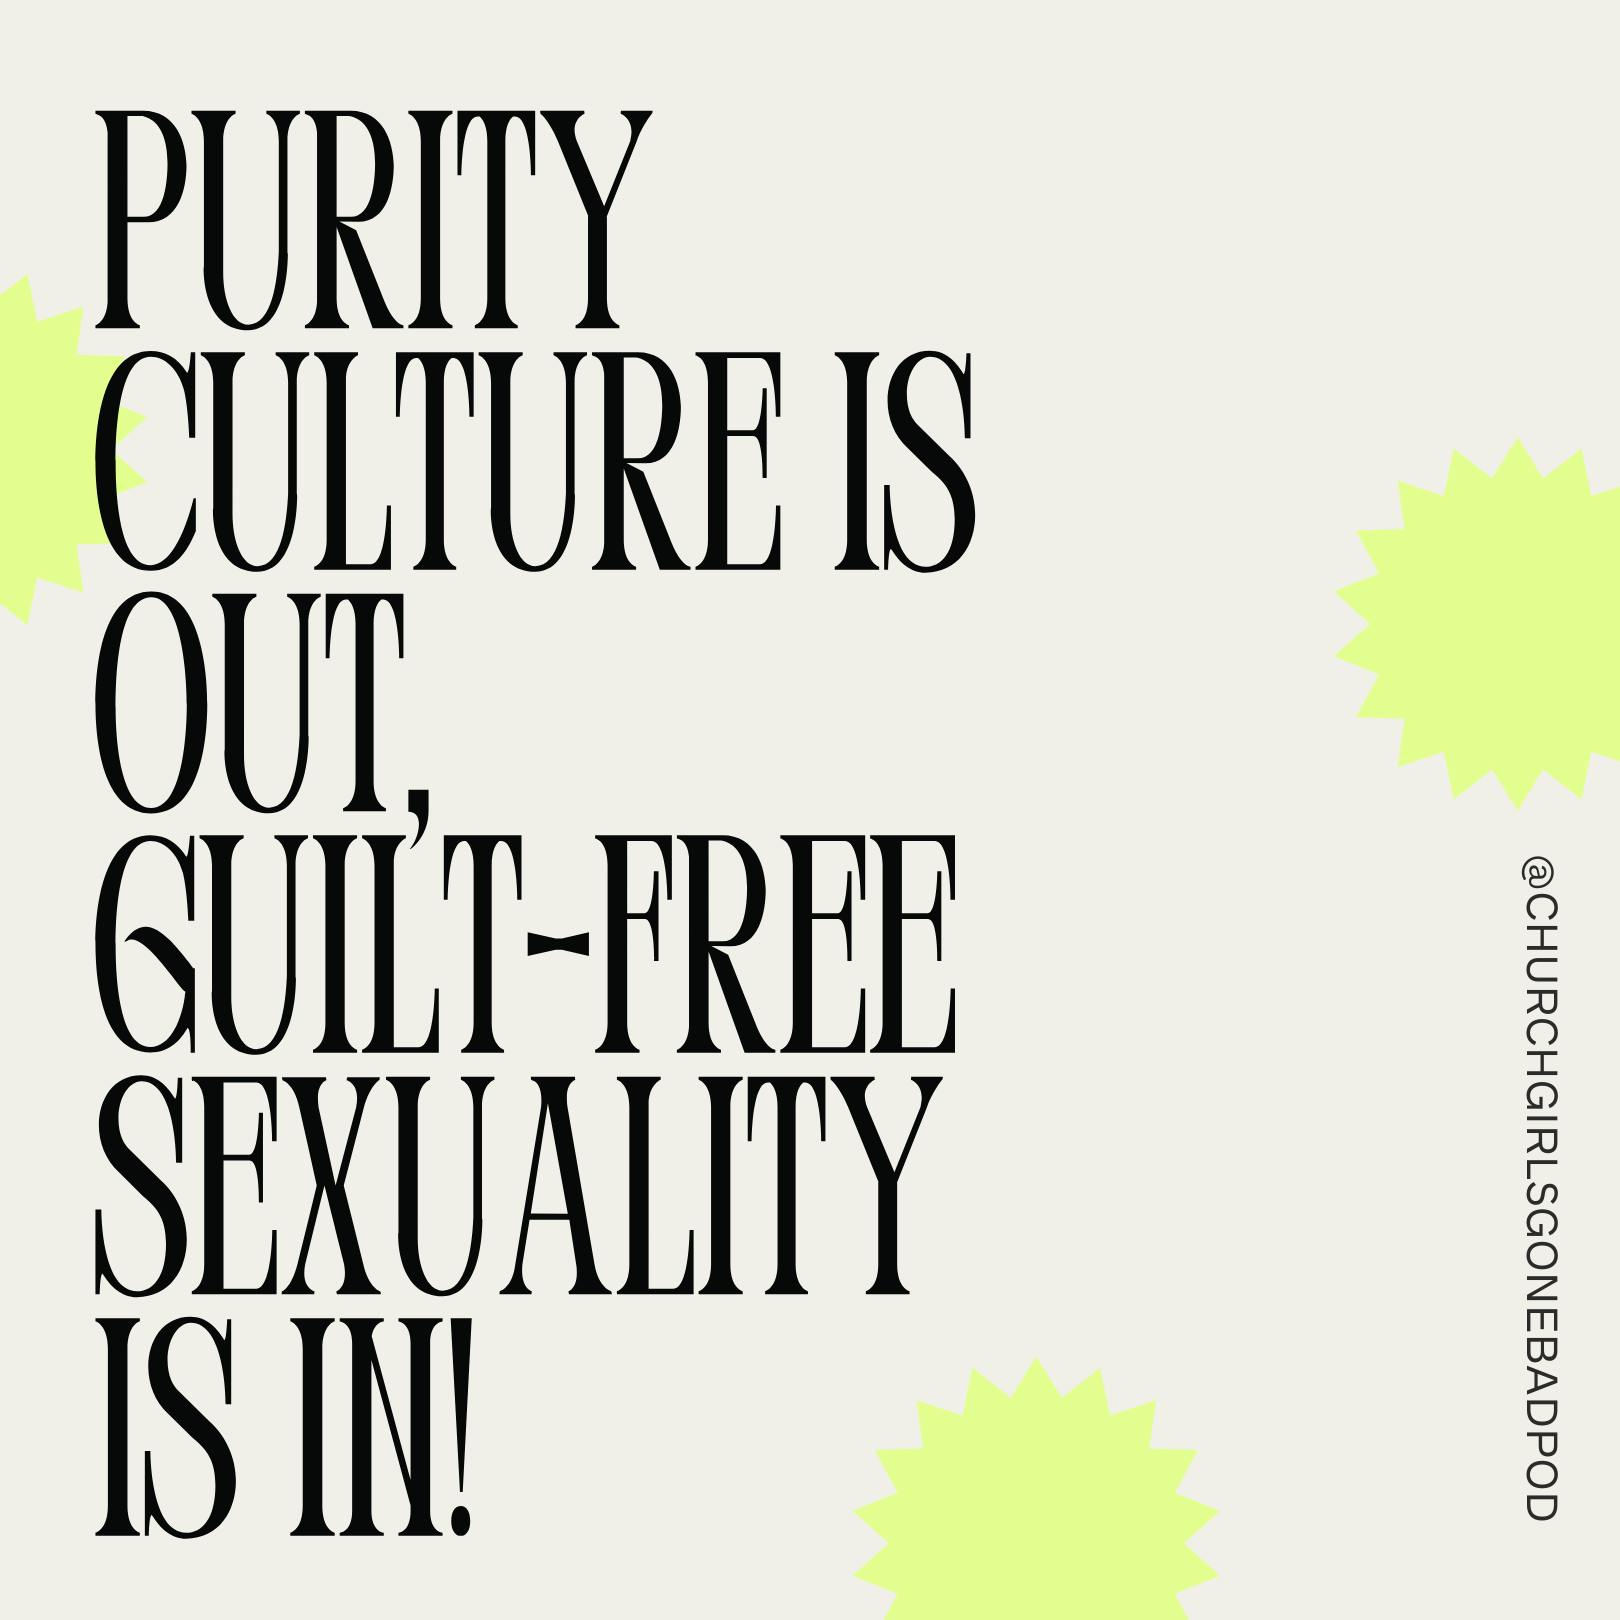 Purity Culture Is Out, Guilt-Free Sexuality Is In!